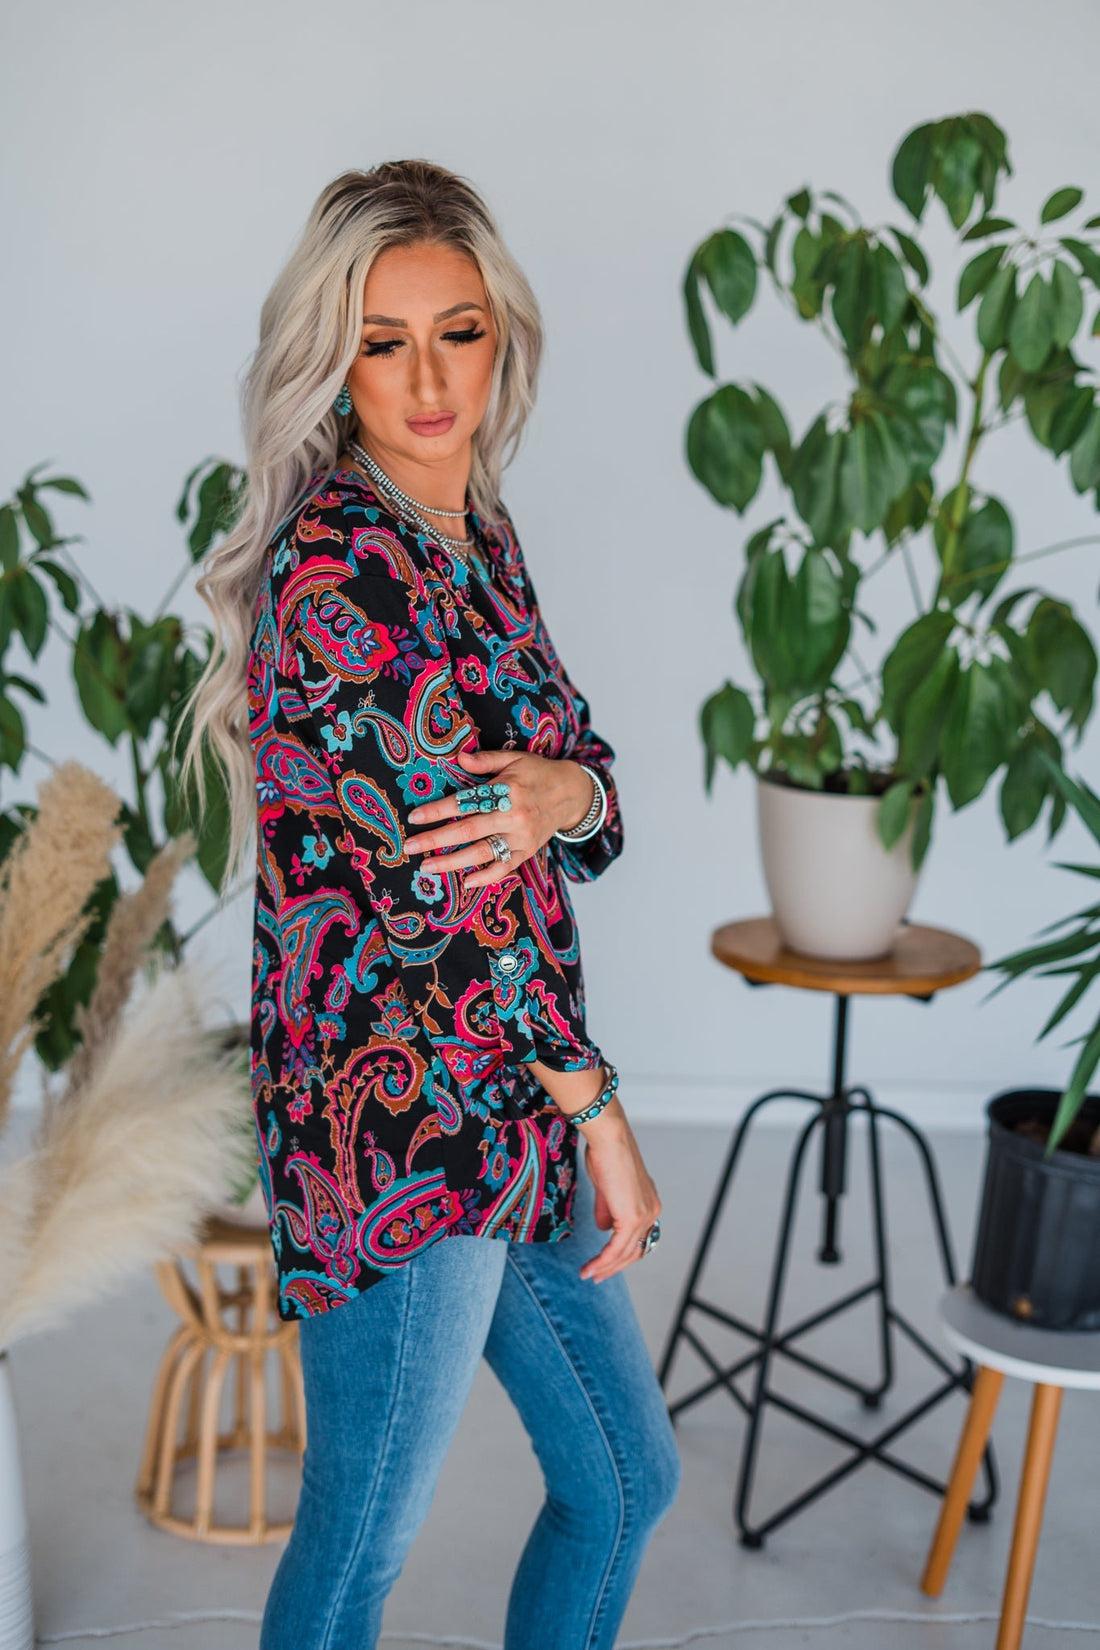 Floral & Paisley Floral 3/4 Sleeve Lizzy V-Neck Top - Whiskey Skies